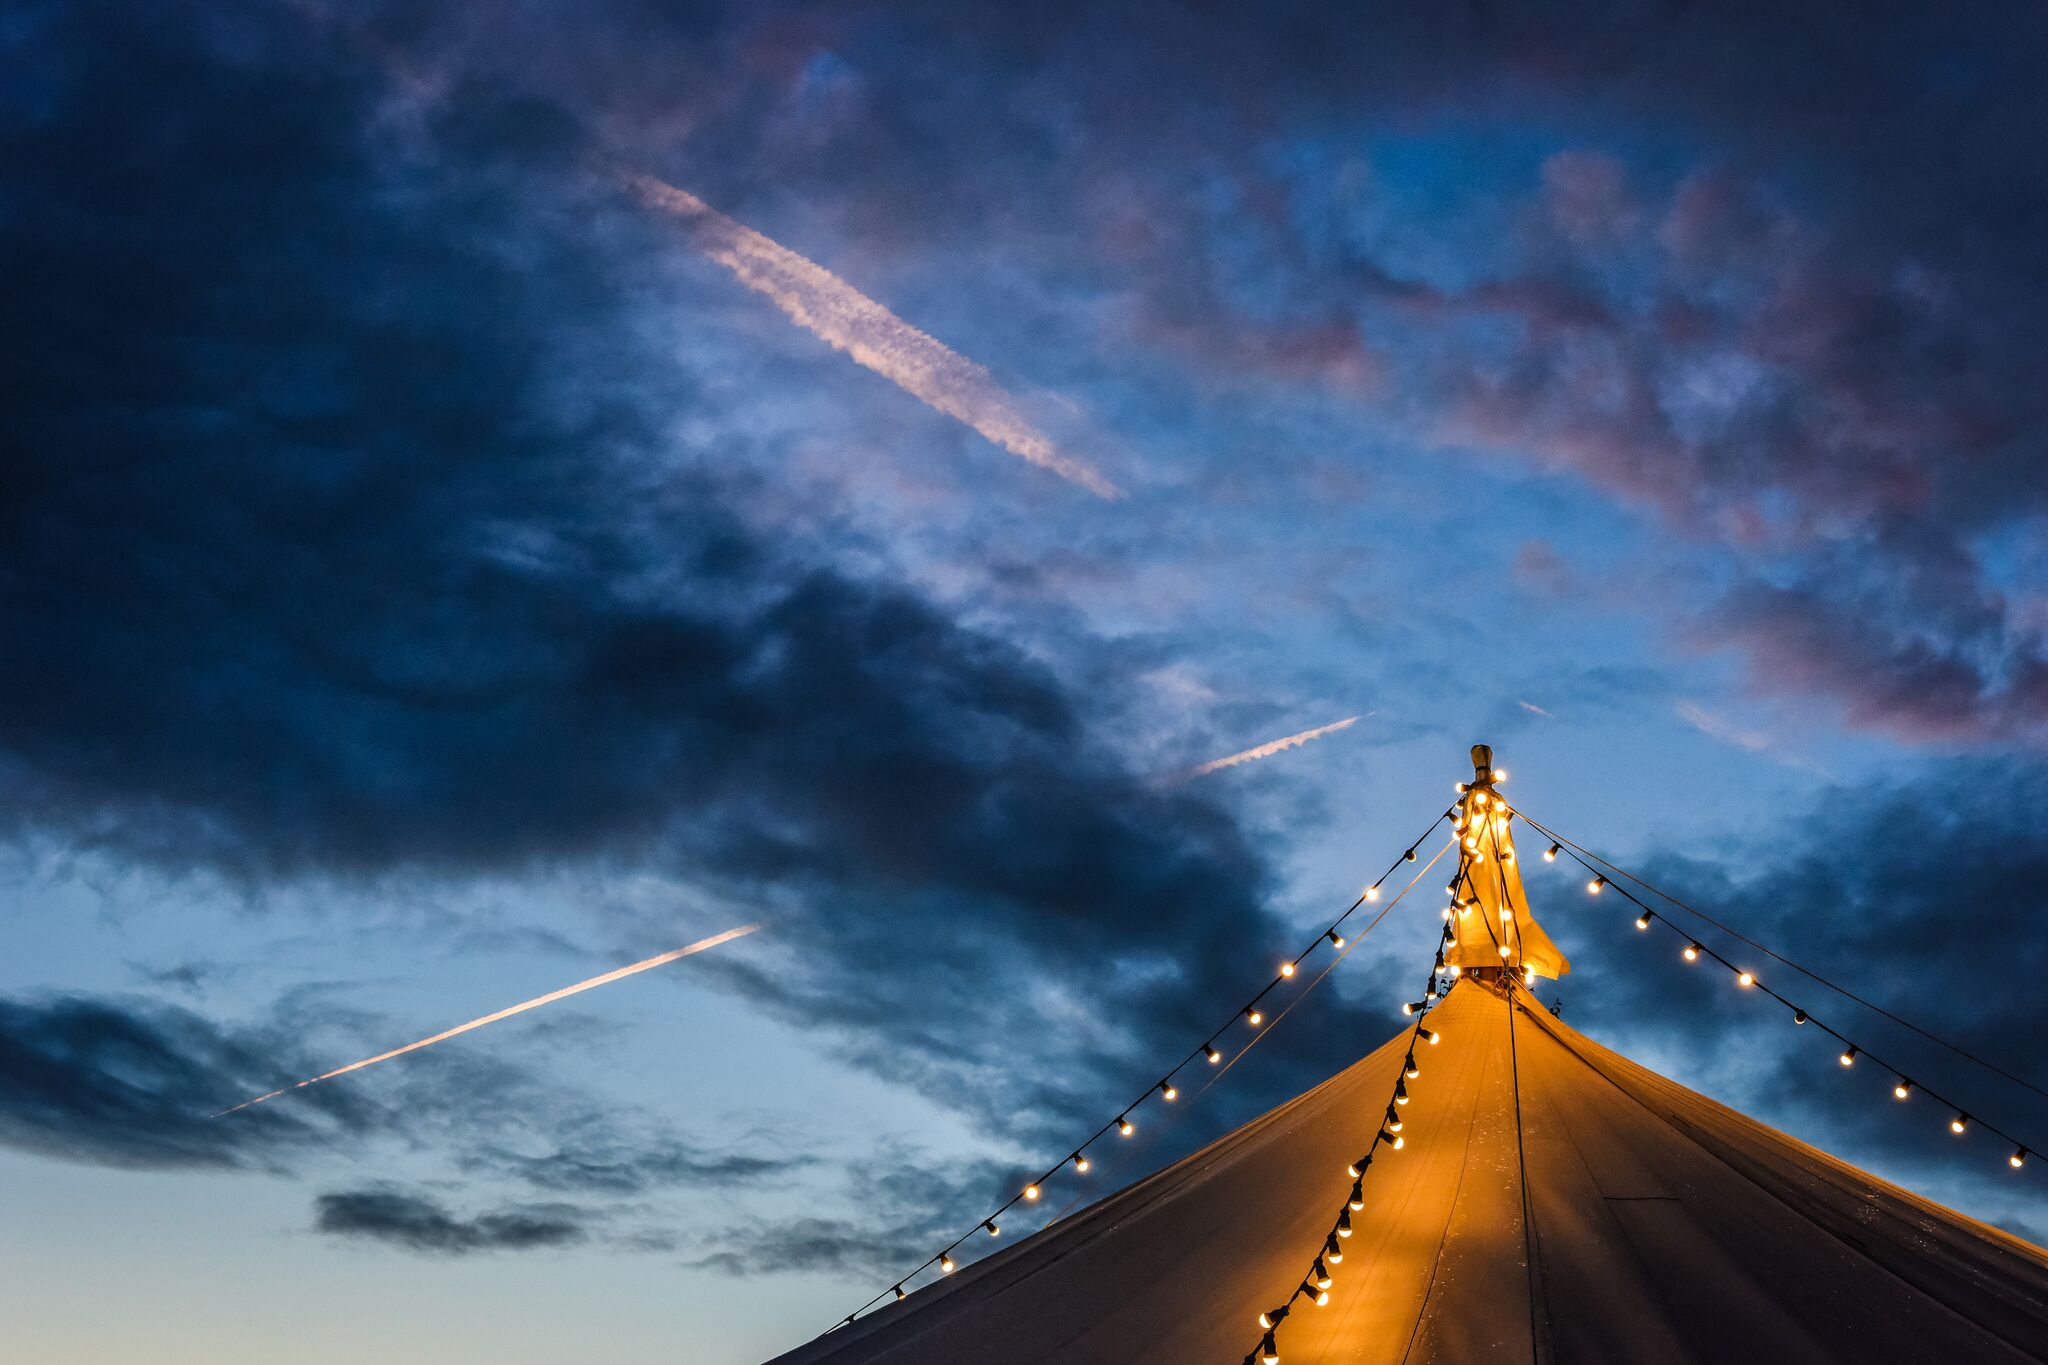 Join the Ambient Literature team at the Hay Festival, May 24th – June 3rd, where we'll be offering workshops, a discussion panel, and debuting a new work, Words We Never Wrote.